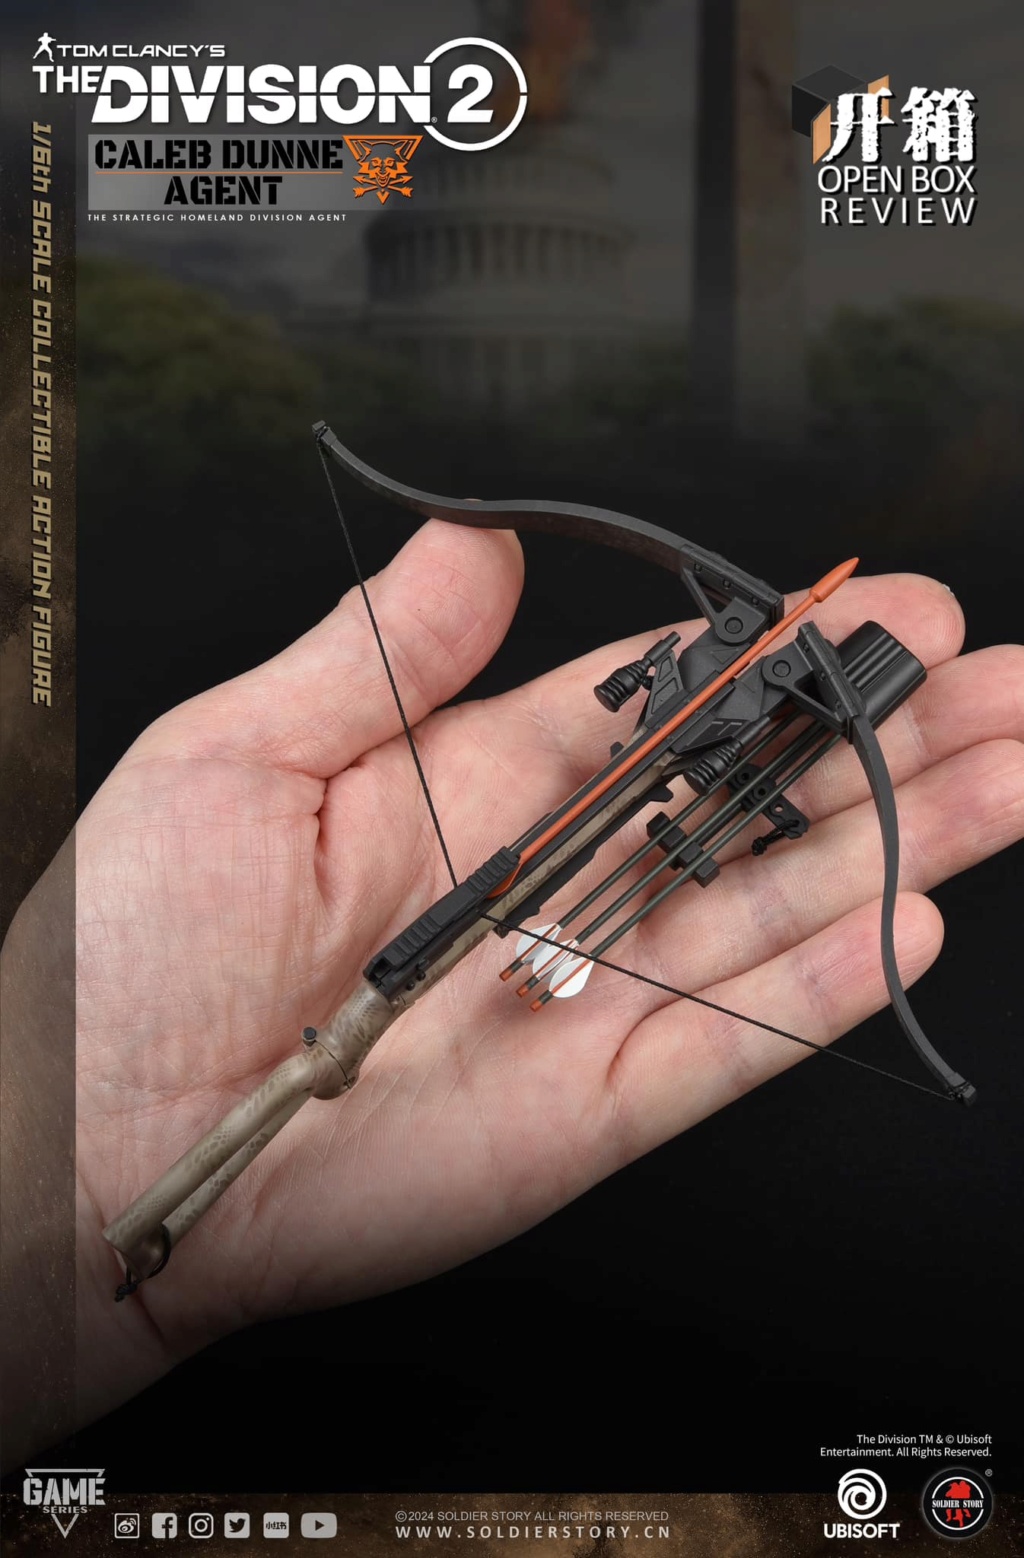 VideoGame-Based - NEW PRODUCT: SOLDIER STORY: #SSG-008 1/6 Scale The Division 2 Agent “Caleb Dunne” Soldie22